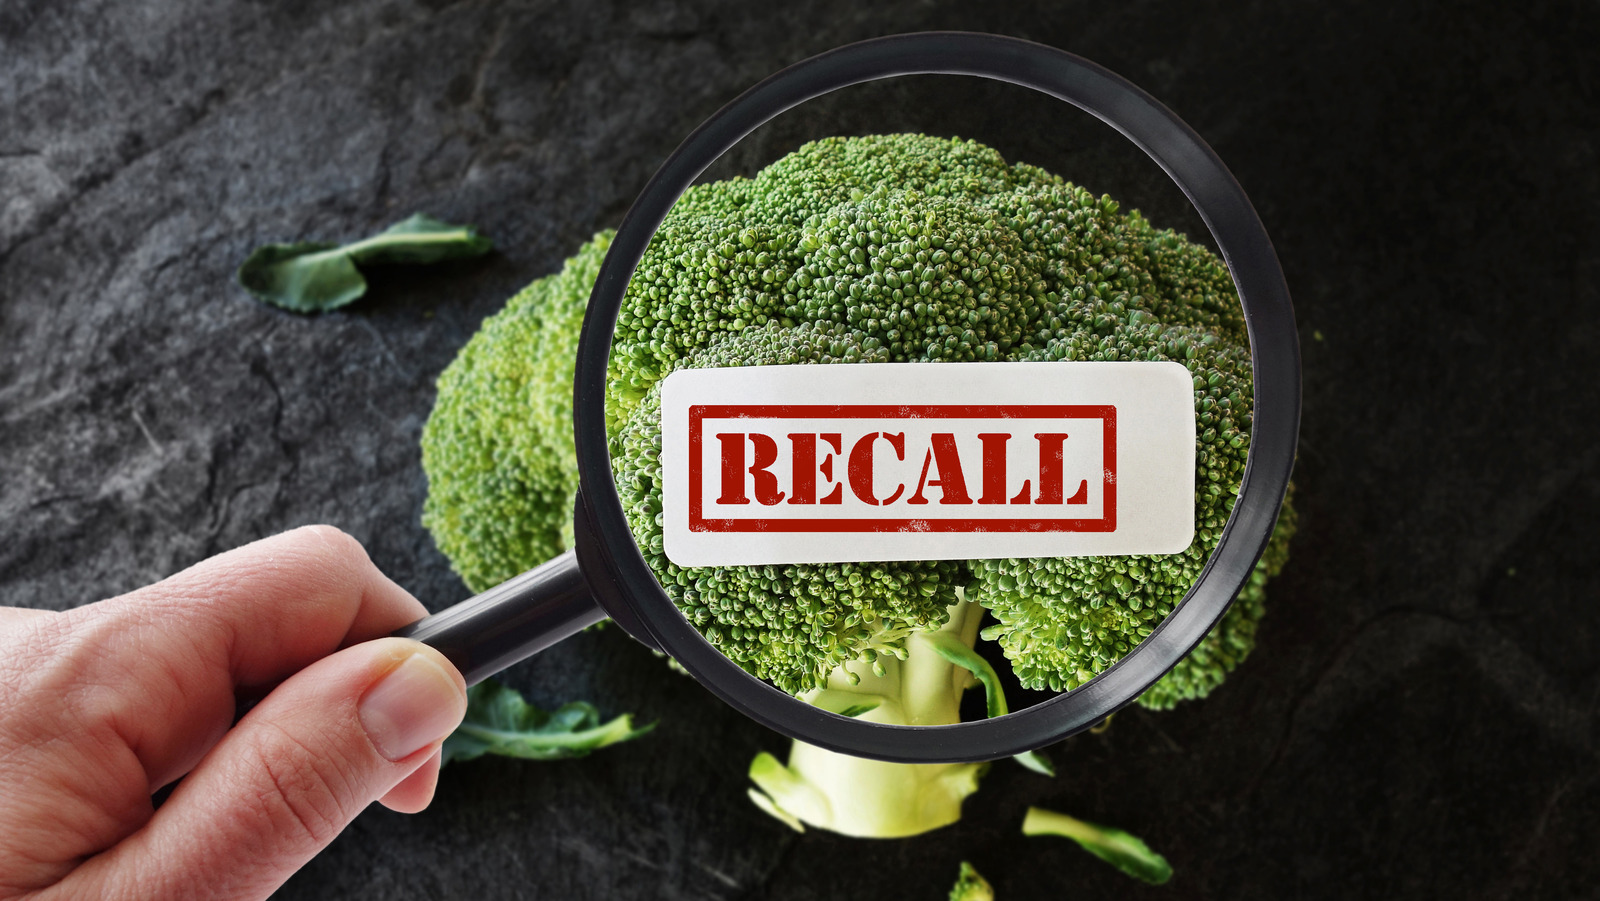 Dillons issues recall on beef, pork and poultry items - KAKE